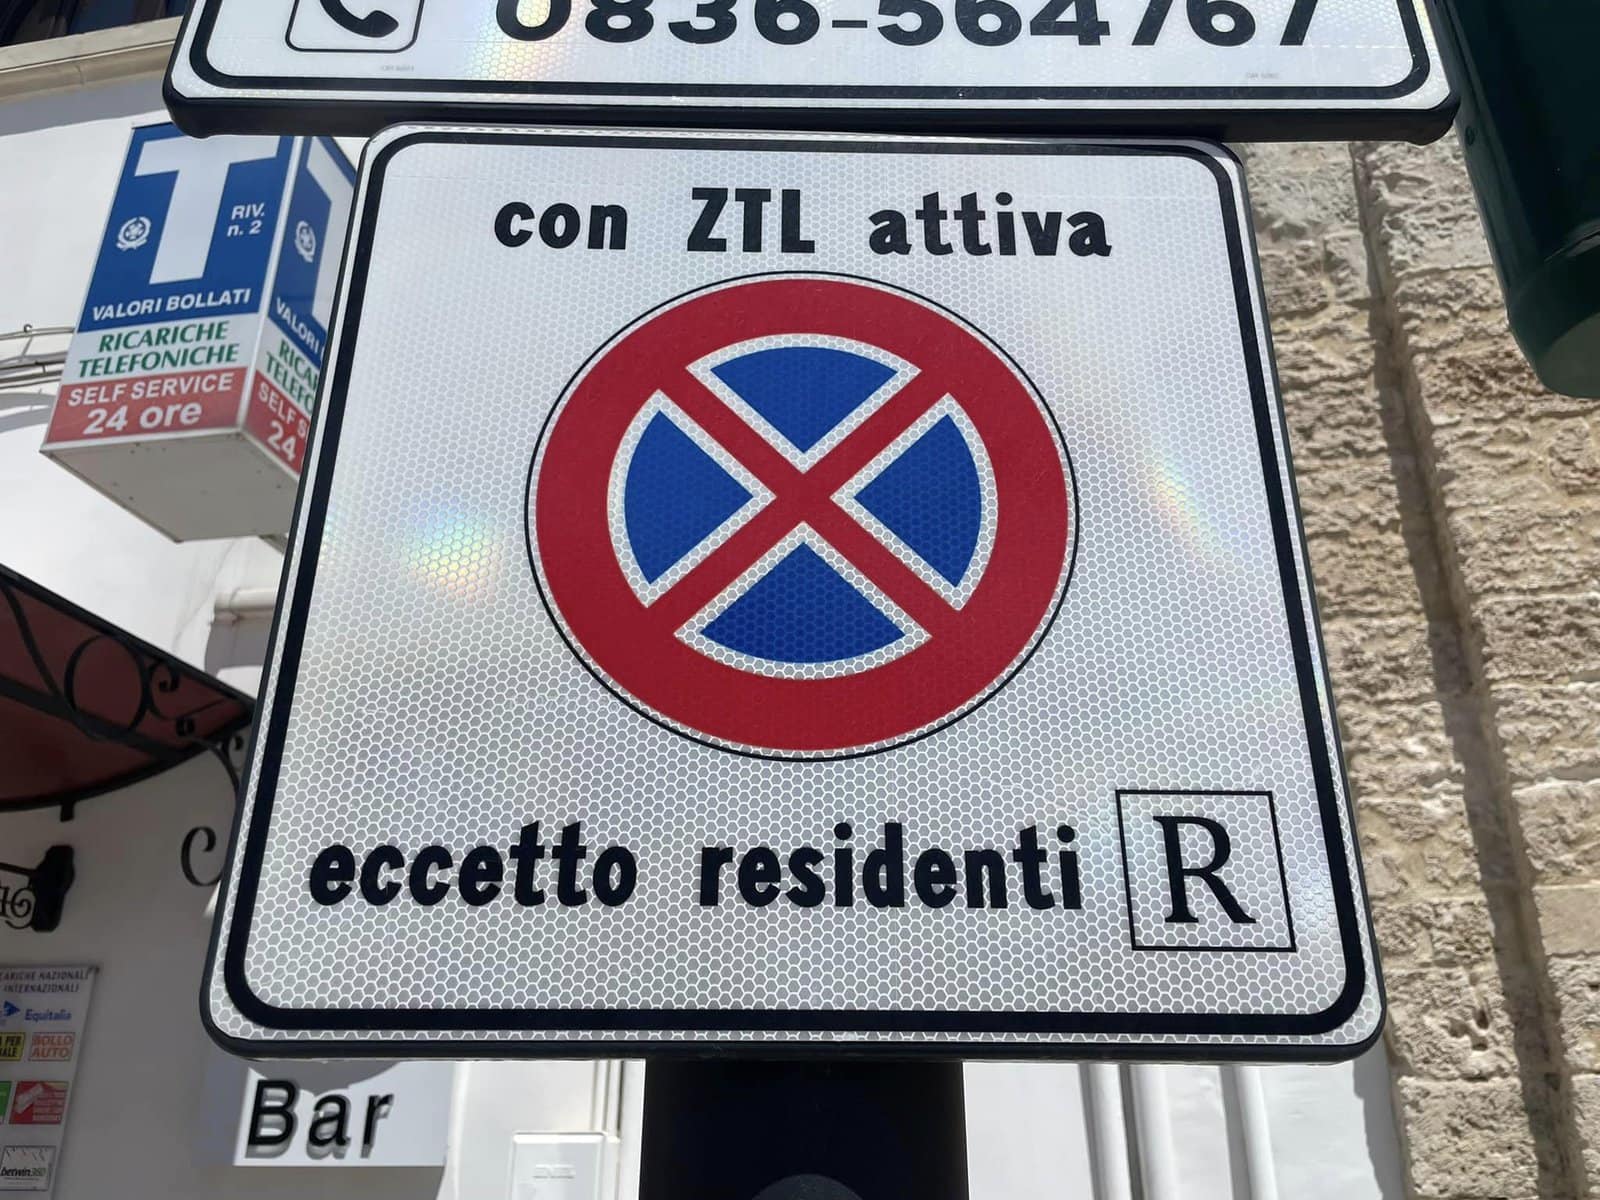 Renting a car in Sicily: Look out for ZTL zones